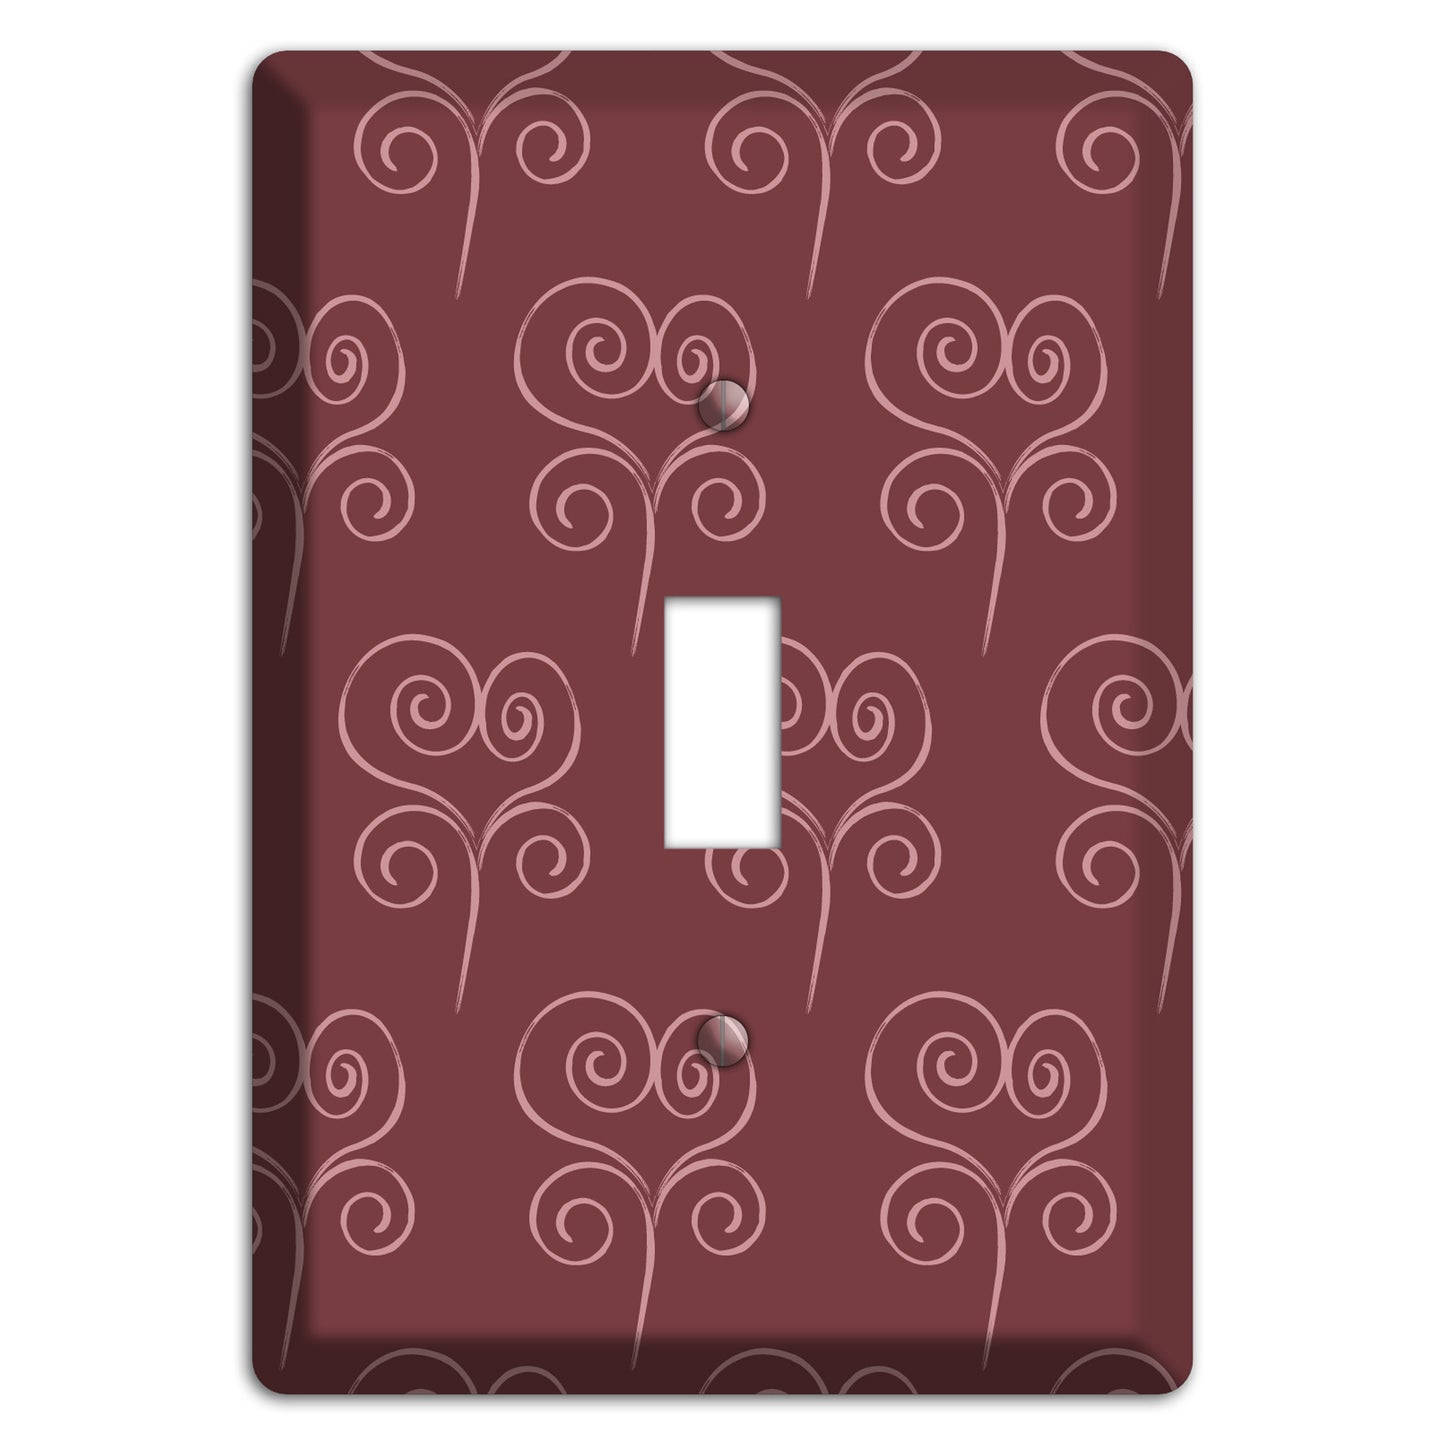 Maroon Scroll Heart Cover Plates